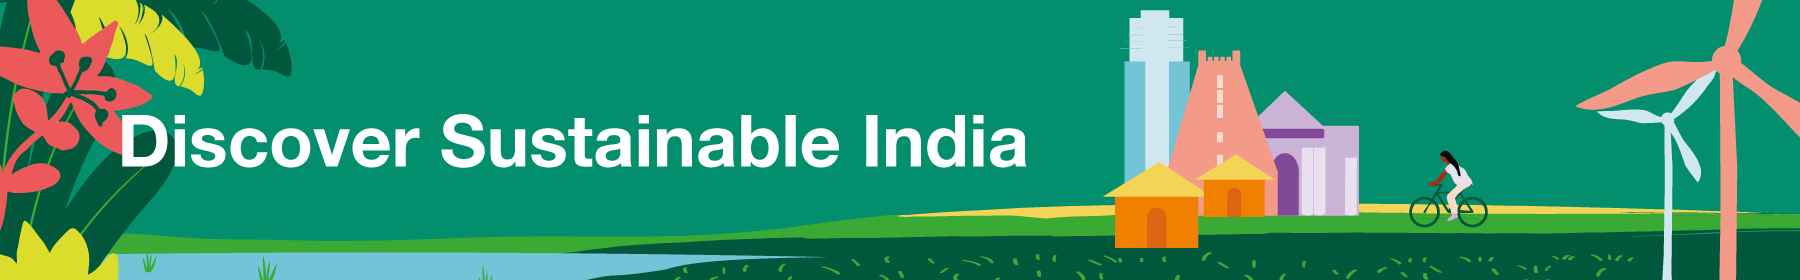 Discover Sustainable India